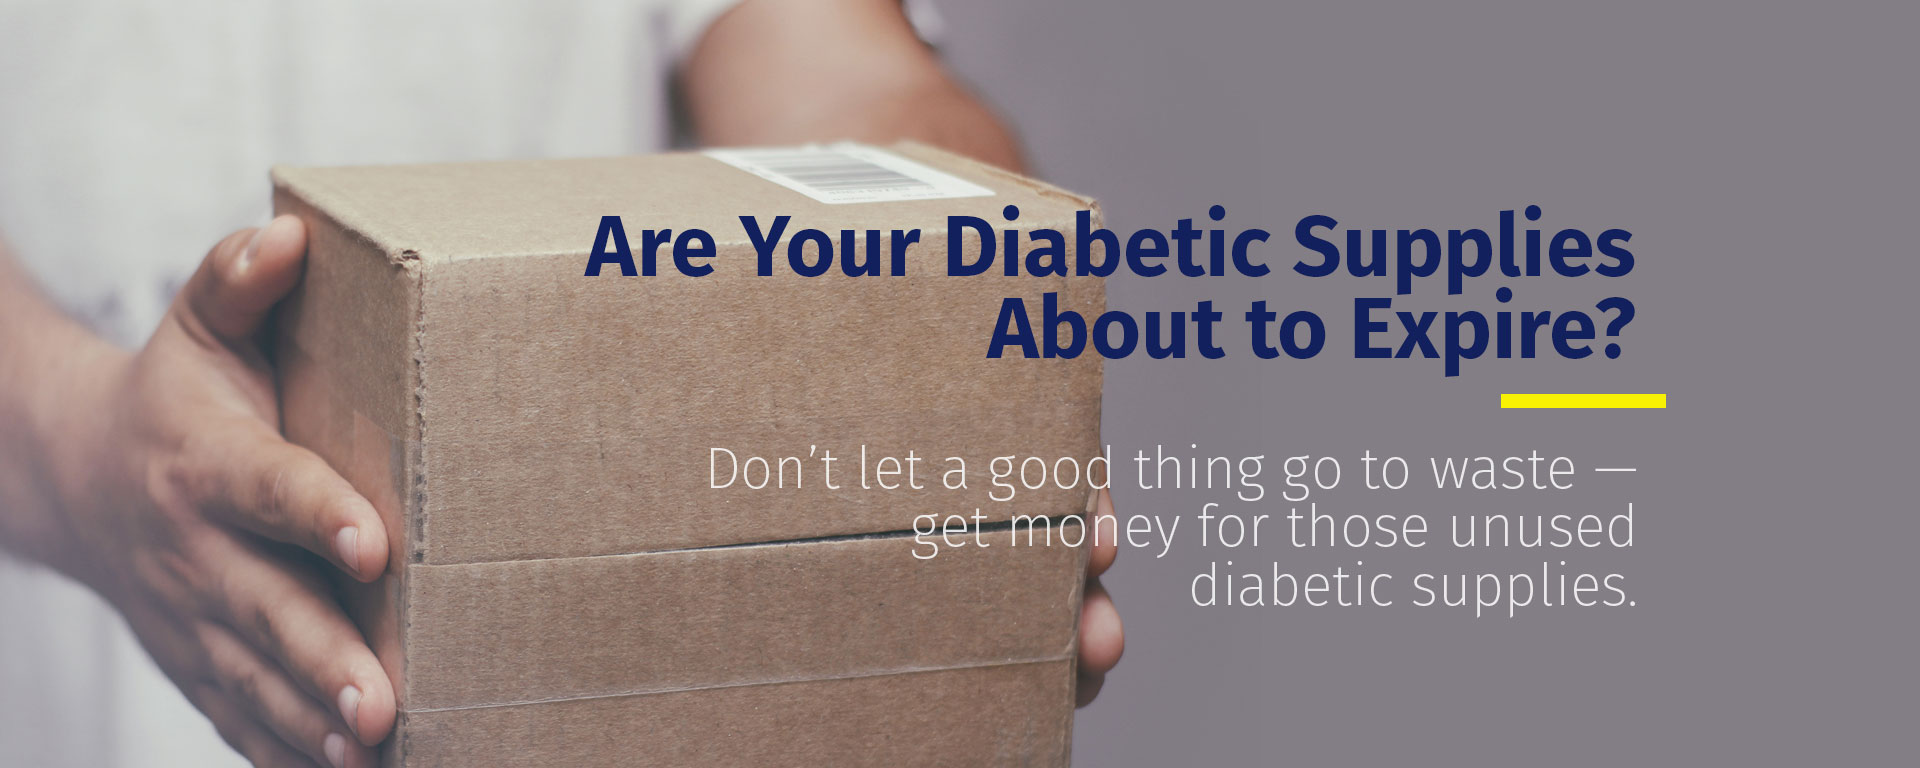 Are your Diabetic Supplies About to Expire?